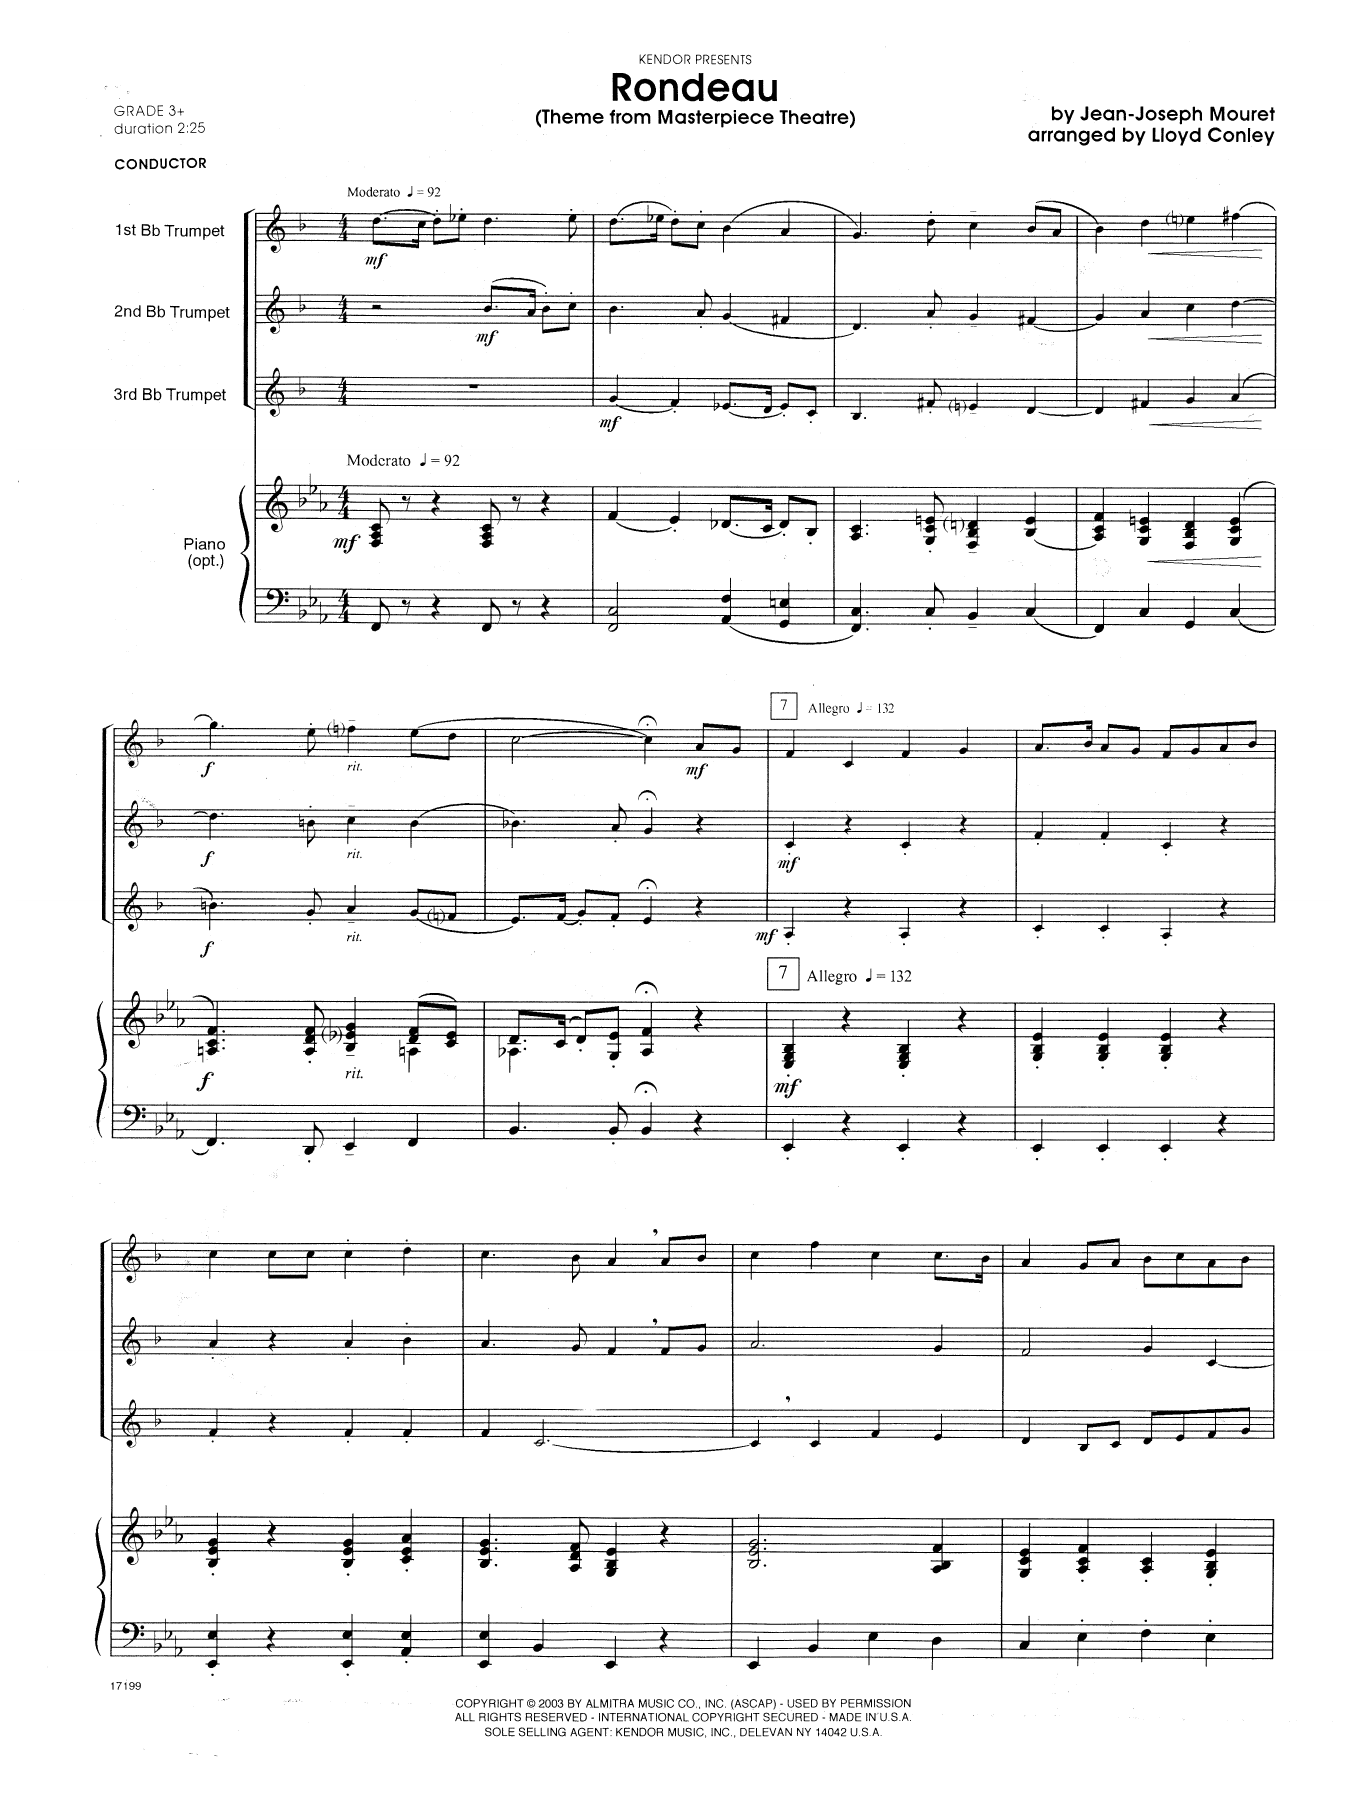 Lloyd Conley Rondeau (Theme From Masterpiece Theatre) - Full Score sheet music notes and chords. Download Printable PDF.